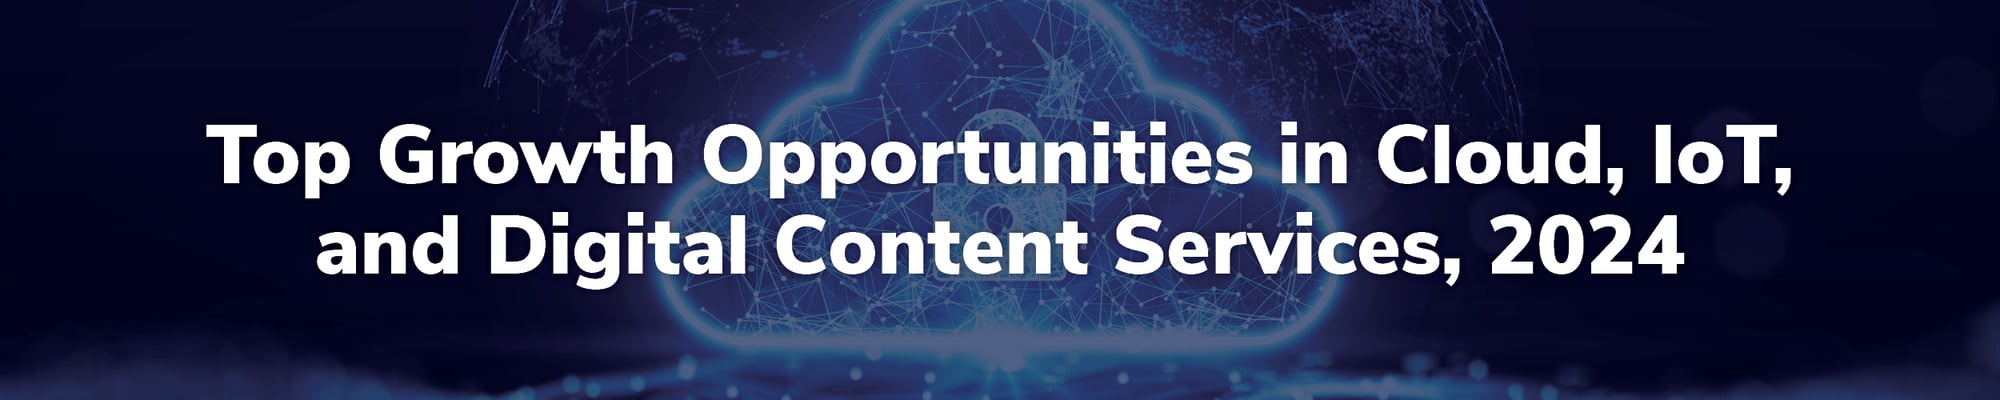 Top Growth Opportunities in Cloud, IoT, and Digital Content Services, 2024